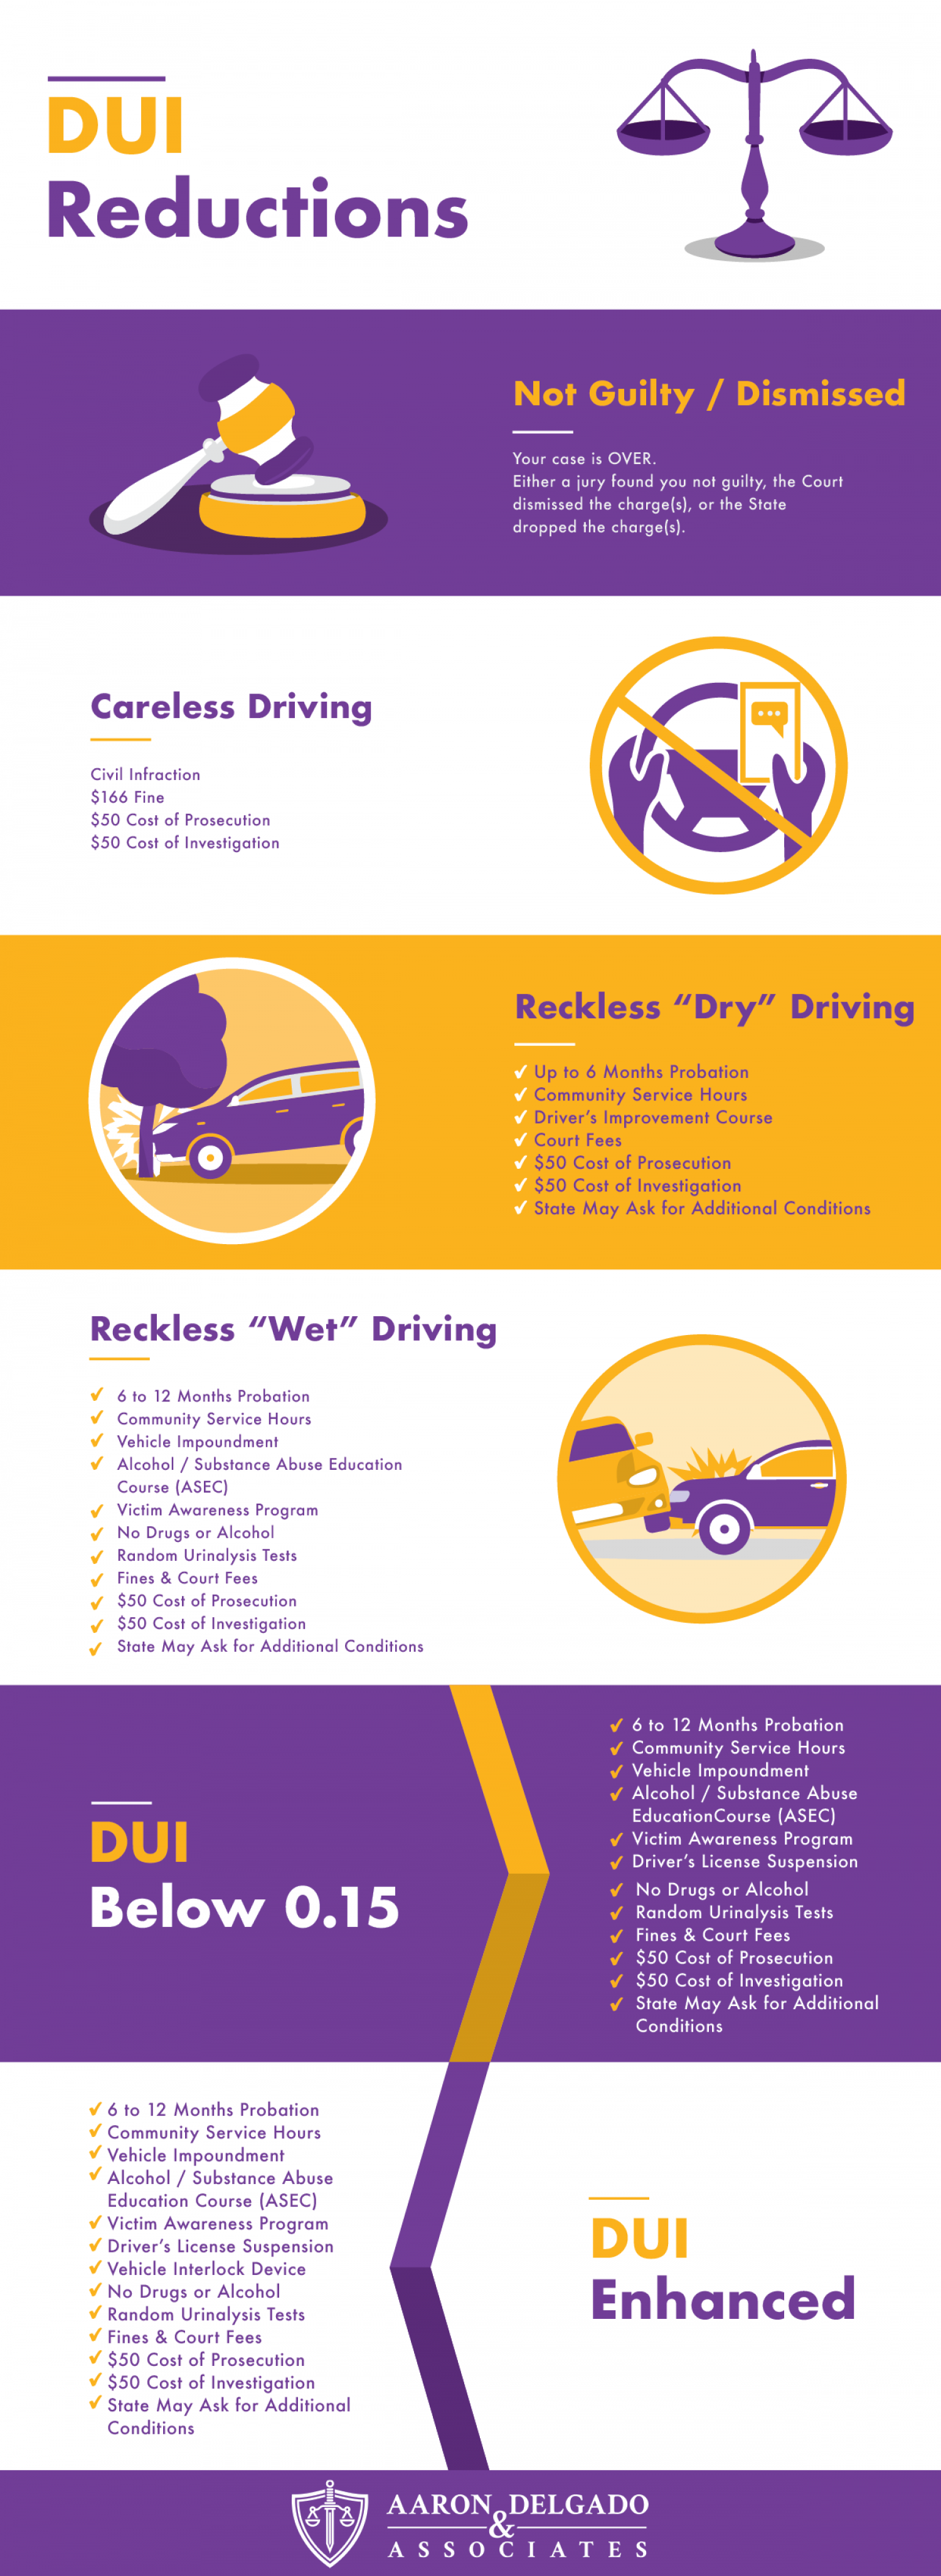 DUI Reductions in Florida Infographic